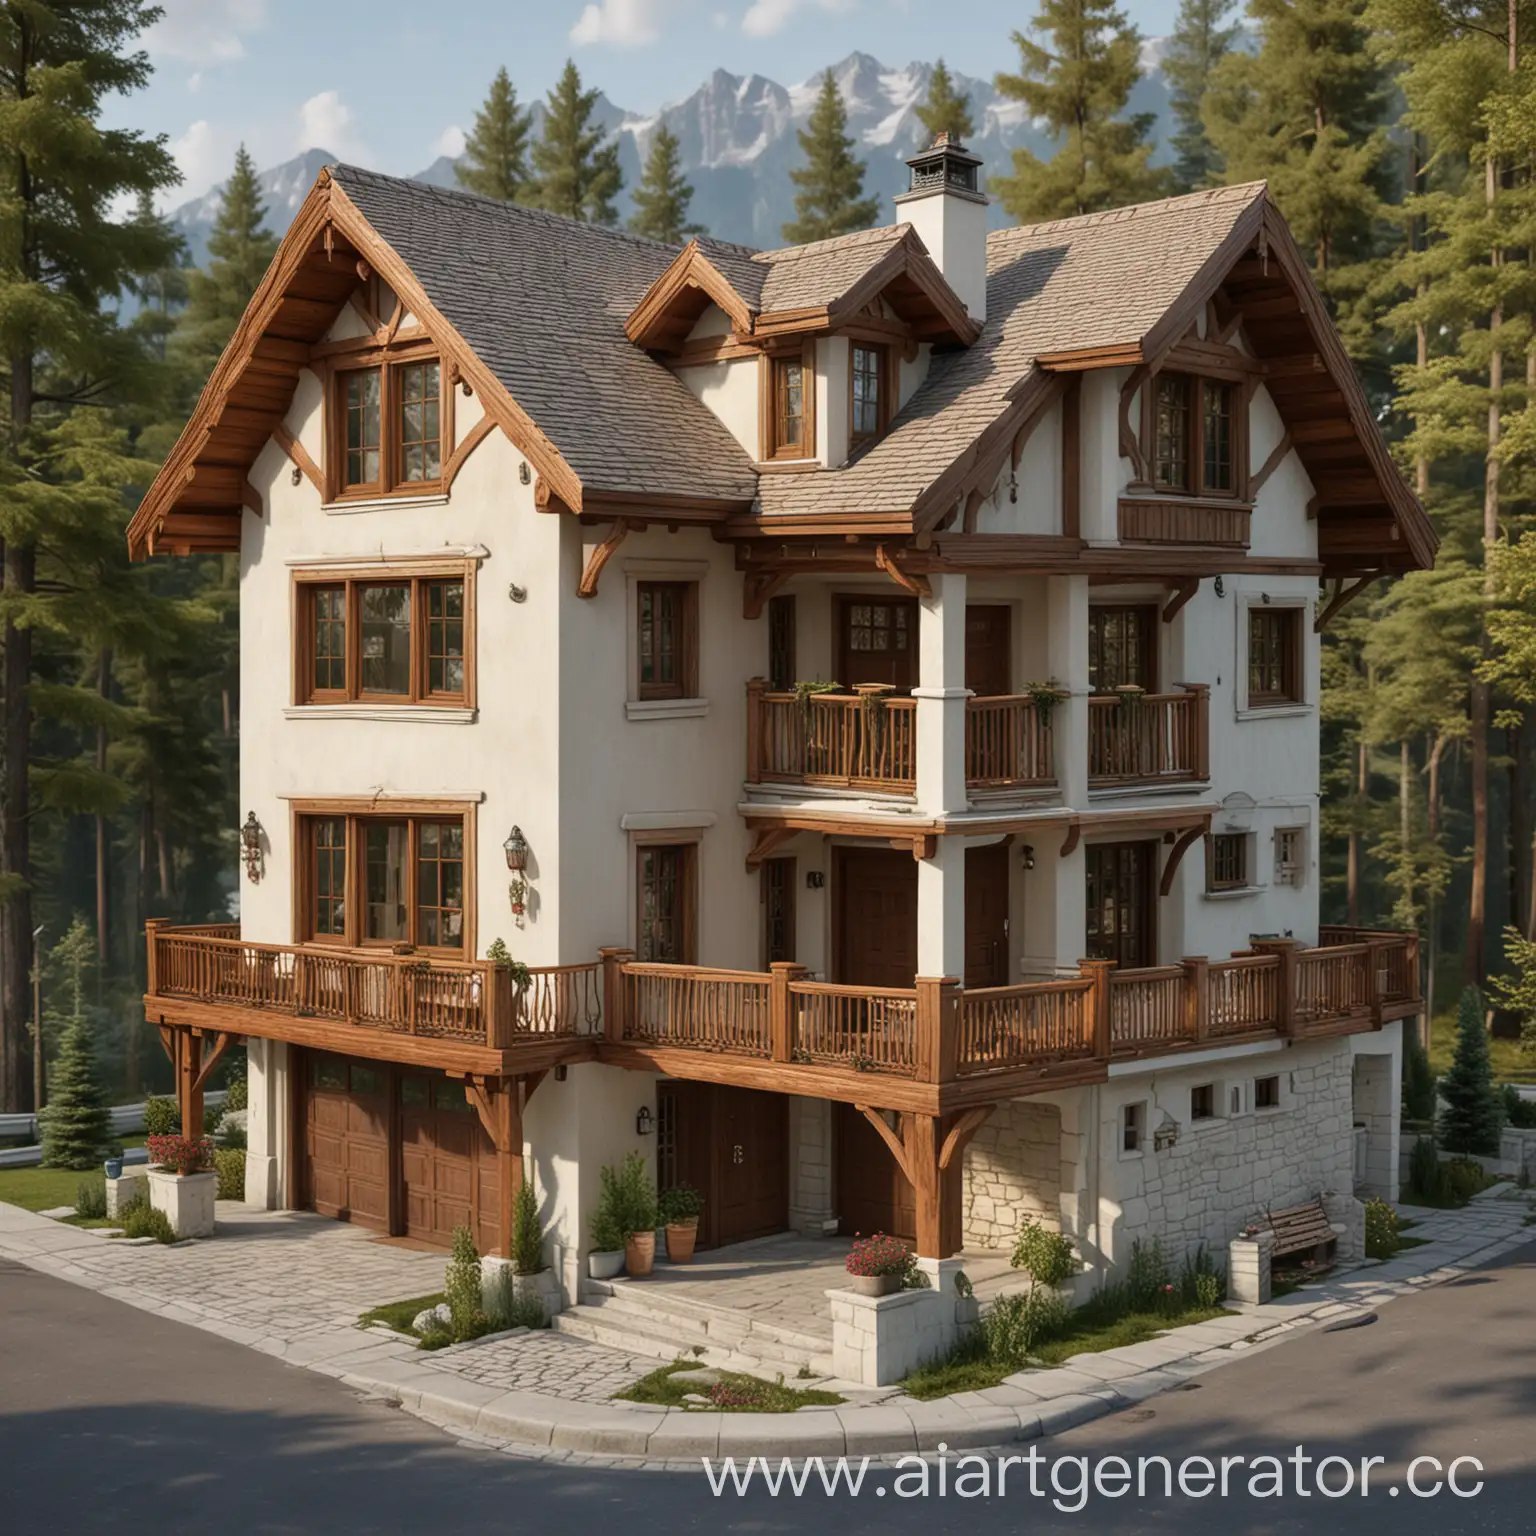 Chalet-Style-TwoStory-House-with-Wooden-Decor-and-Canopy-Balcony